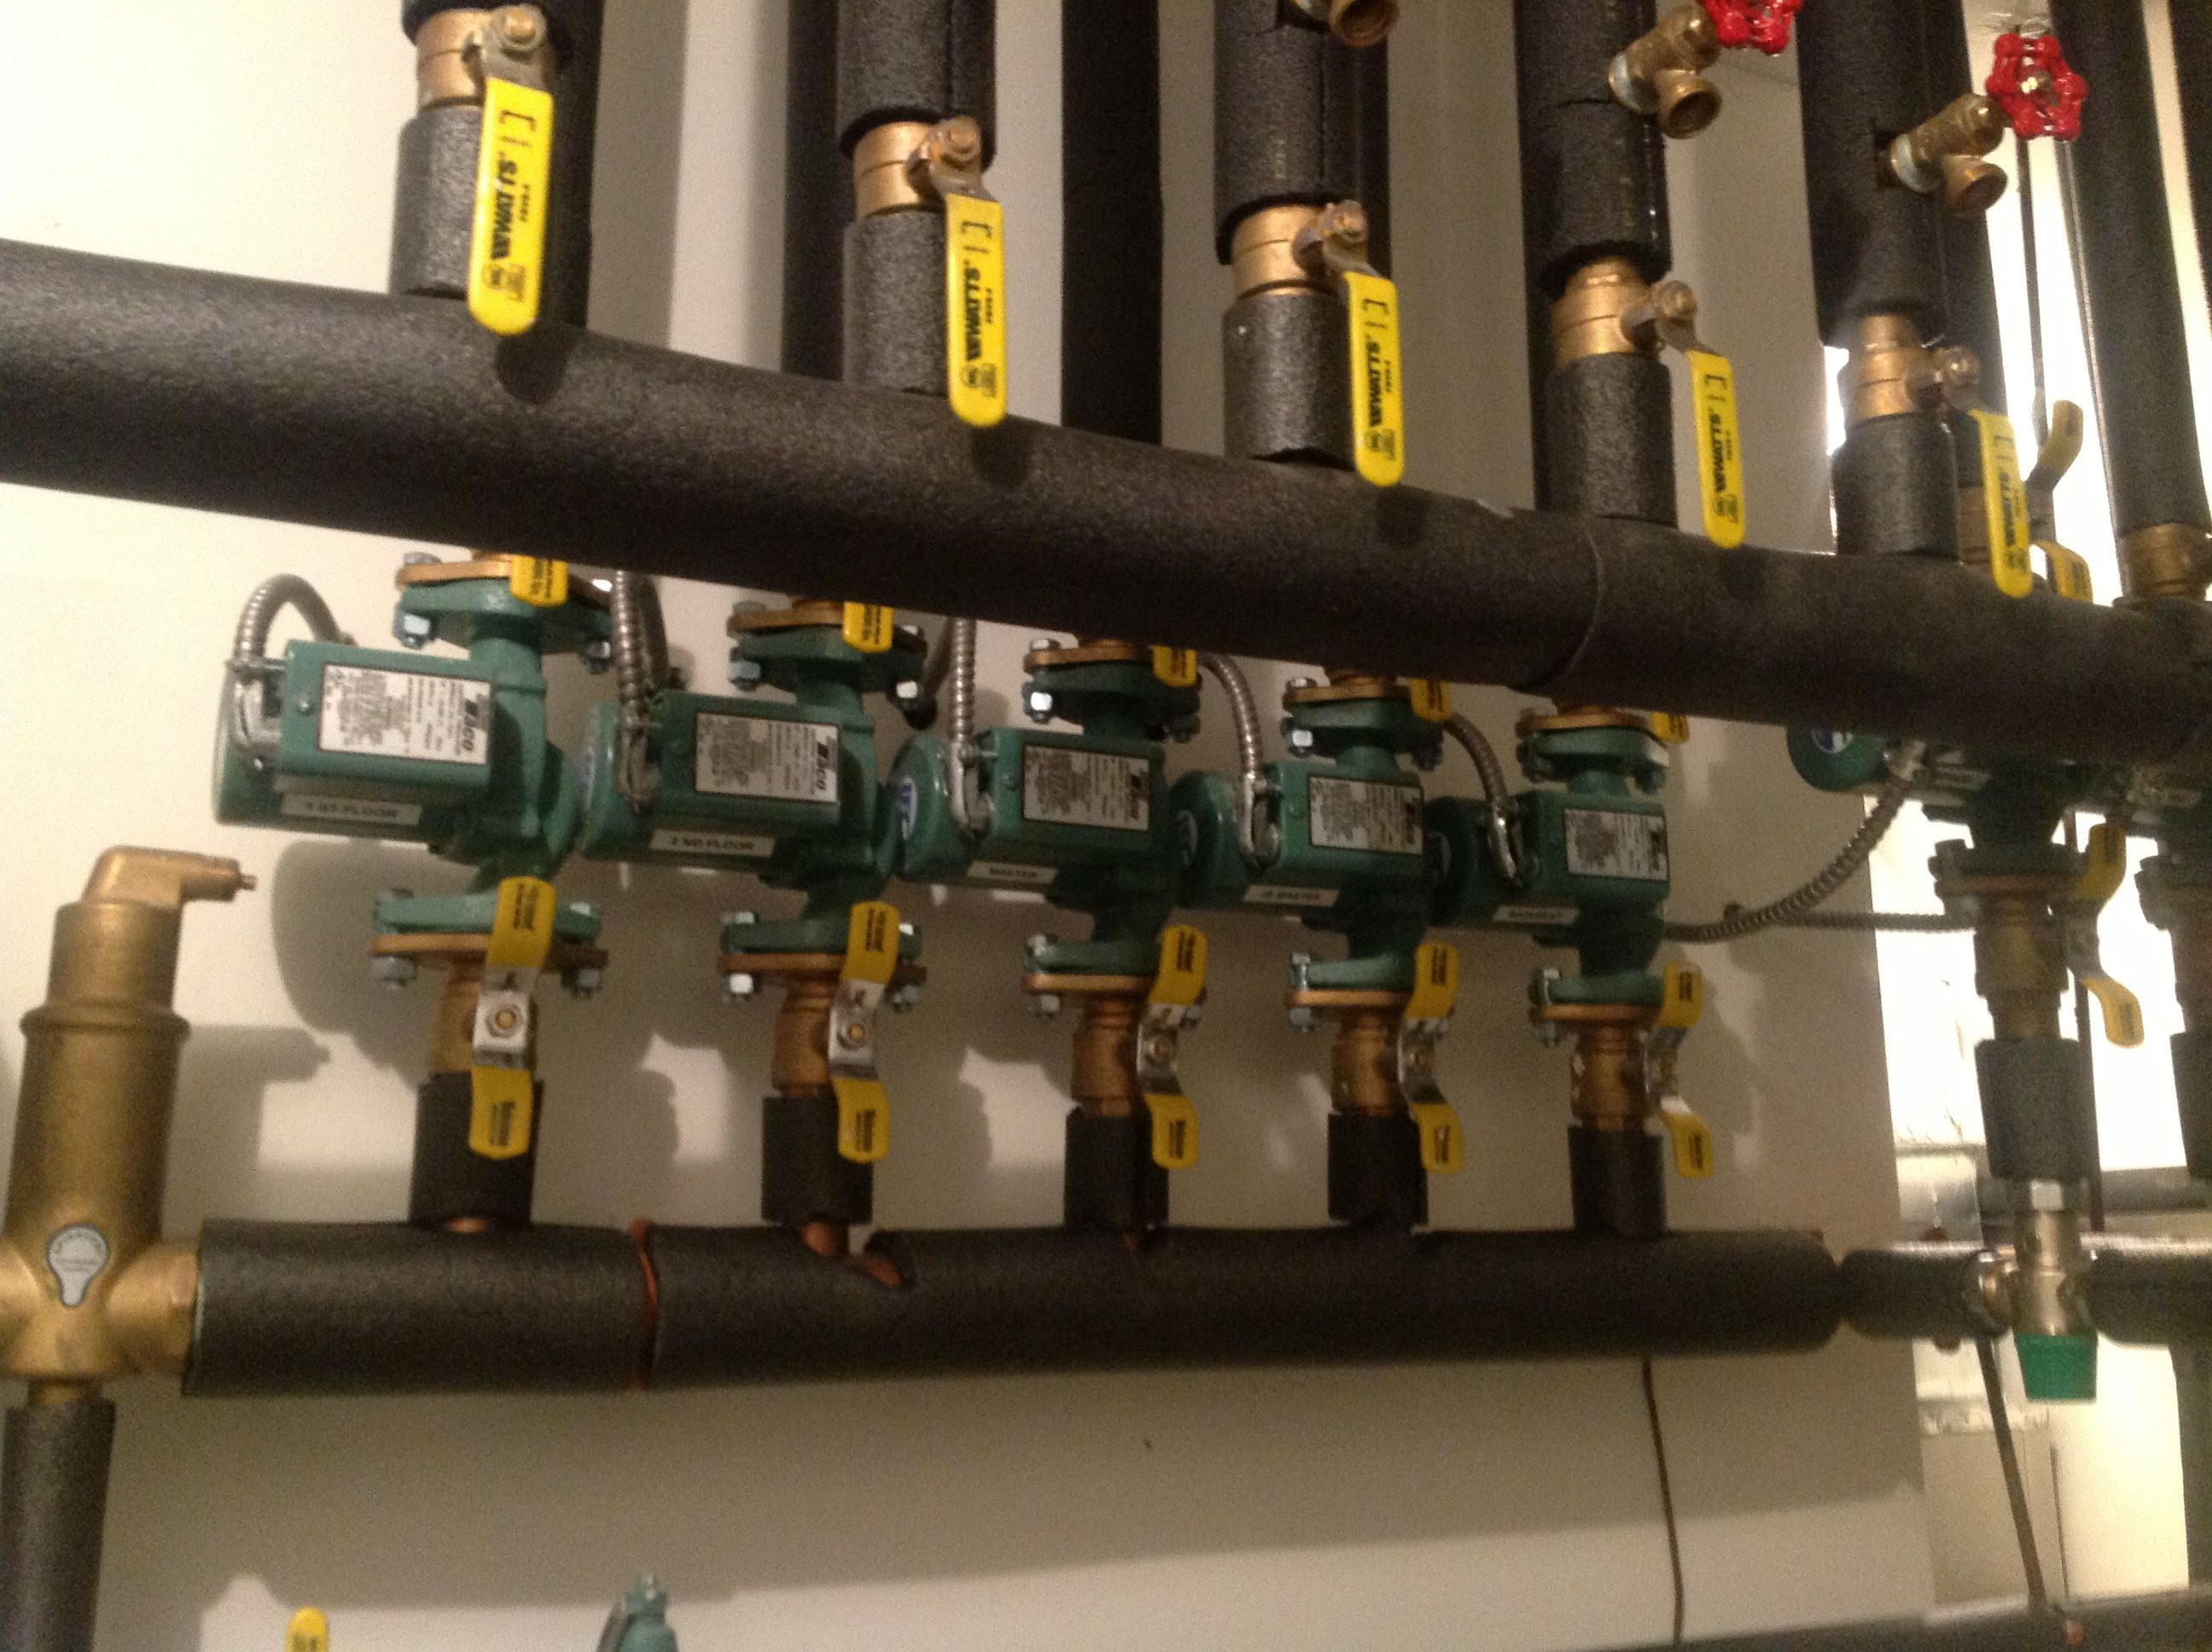 Water loops being individually reset at a residence in the Hamptons(NY)